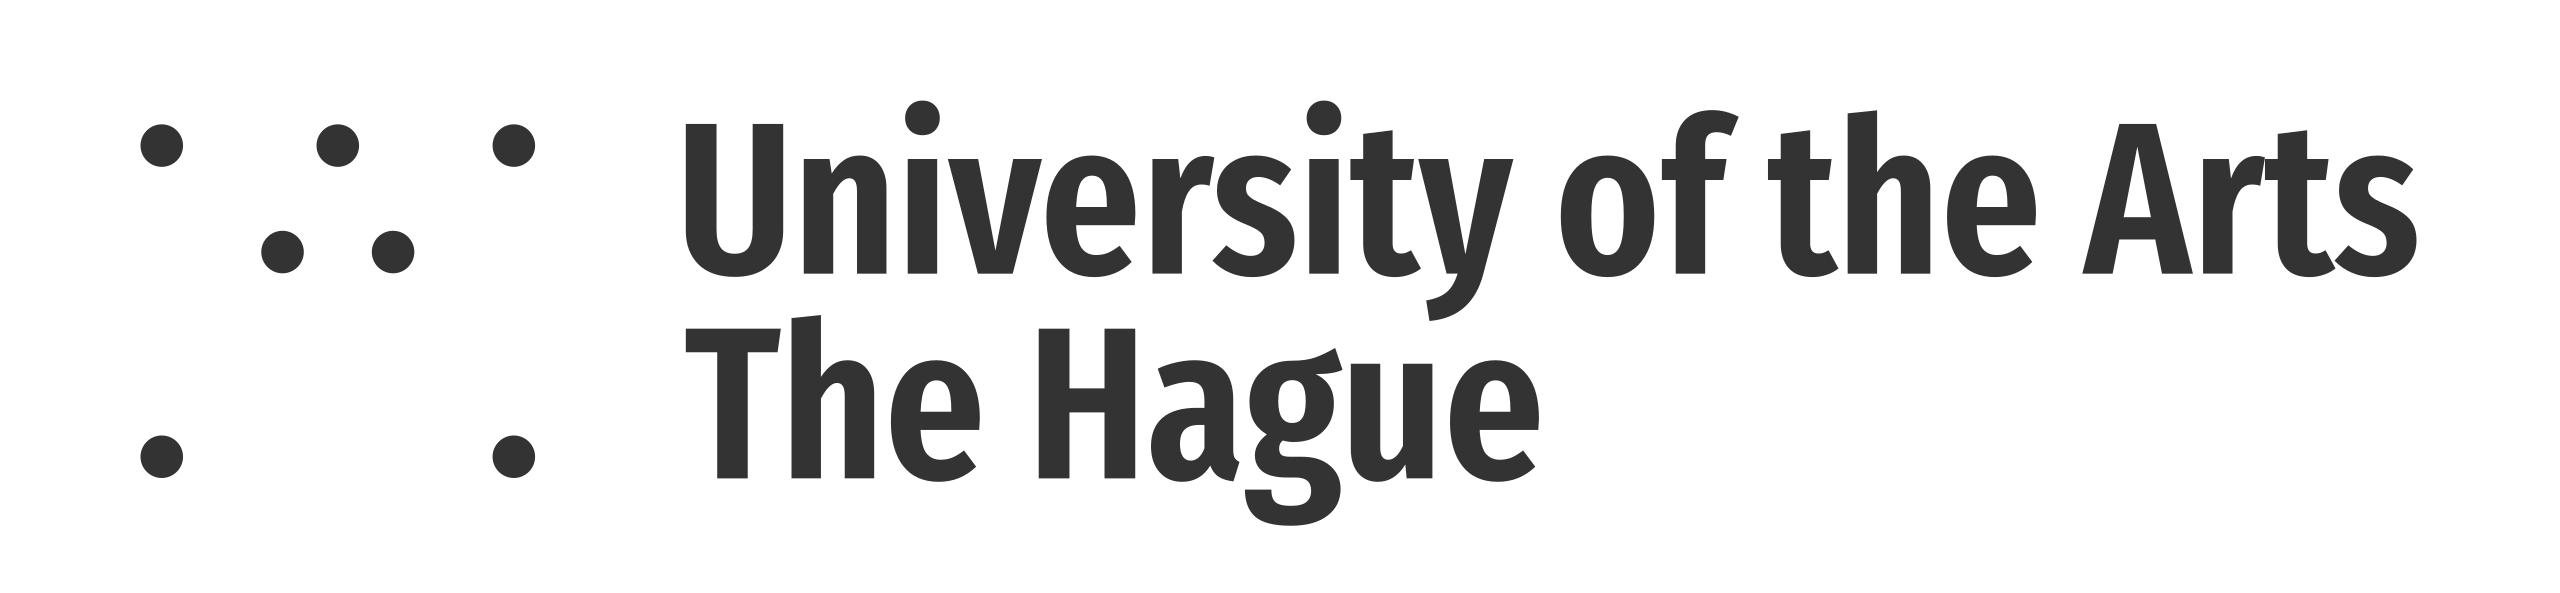 University of the Arts The Hague Netherlands